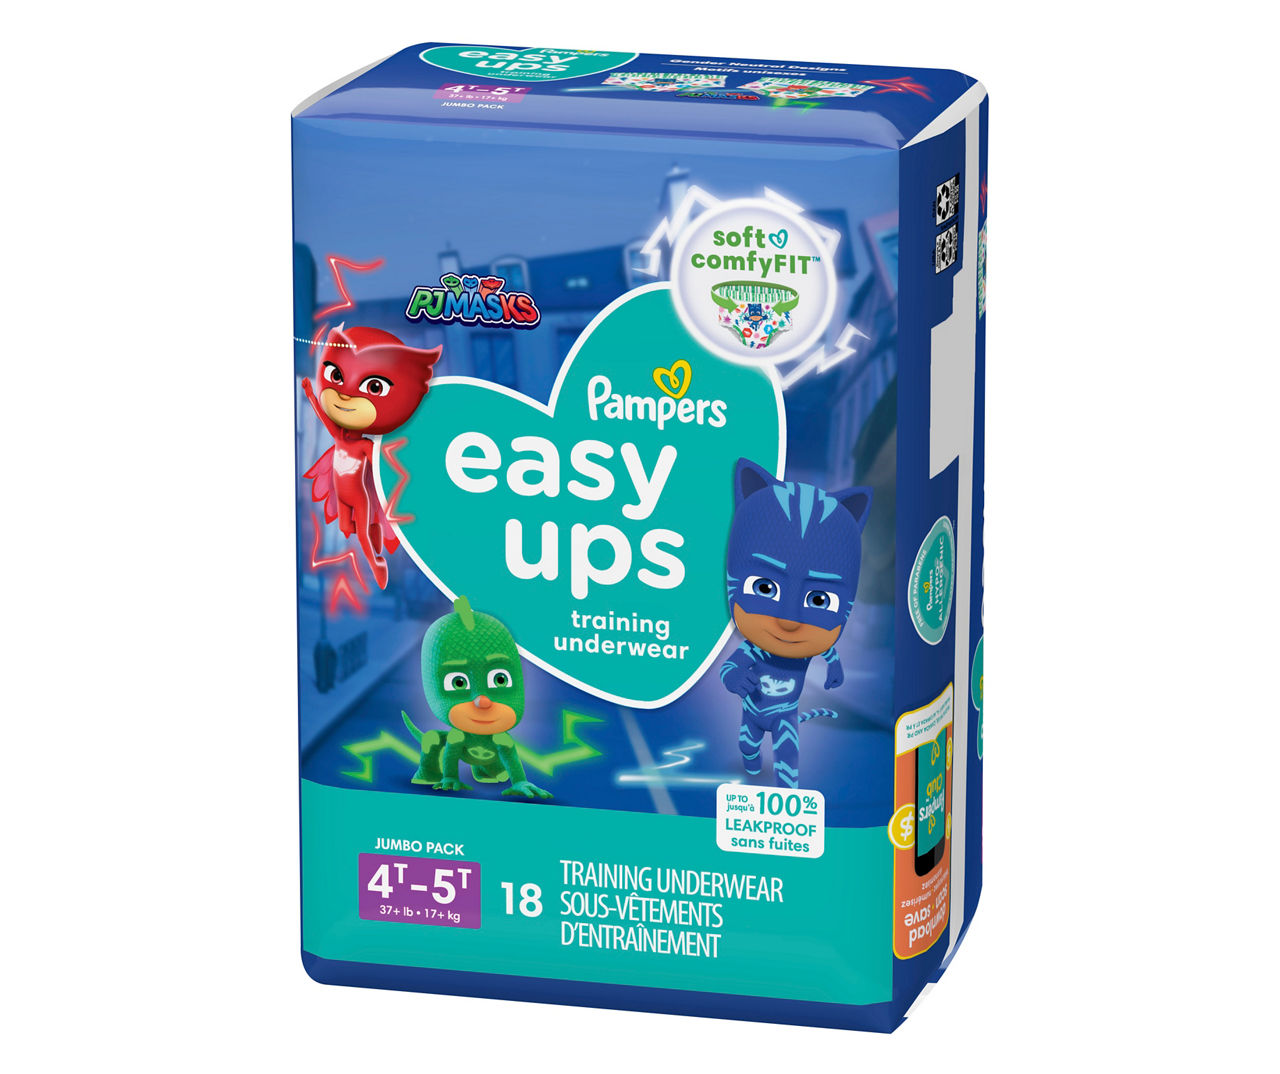 Pampers Size 4T-5T PJ Masks Easy Ups Training Underwear, 18-Count